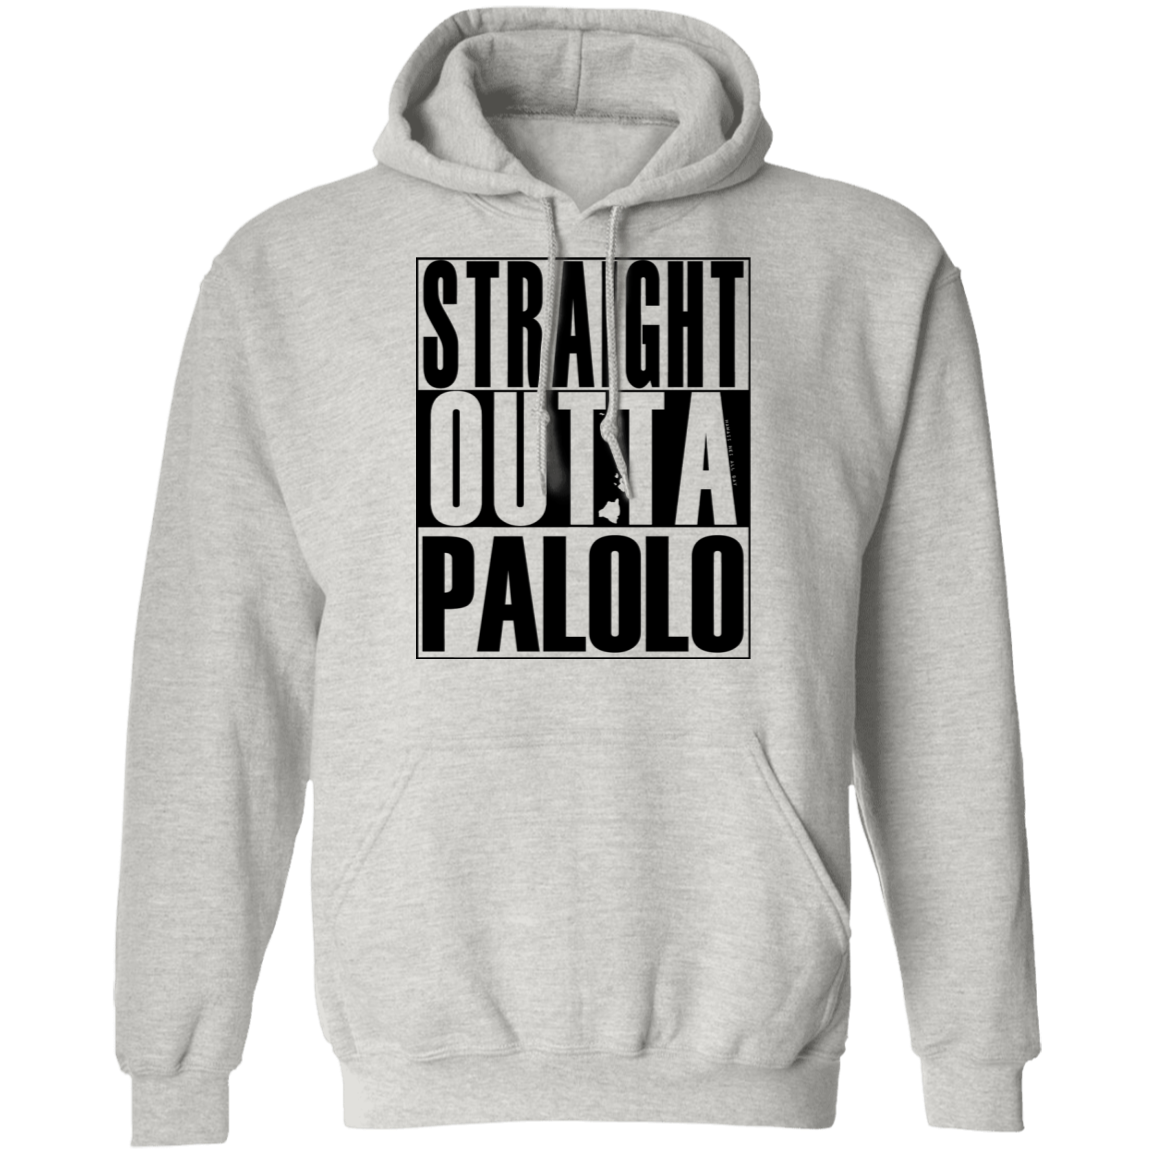 Straight Outta Palolo (black ink) Pullover Hoodie